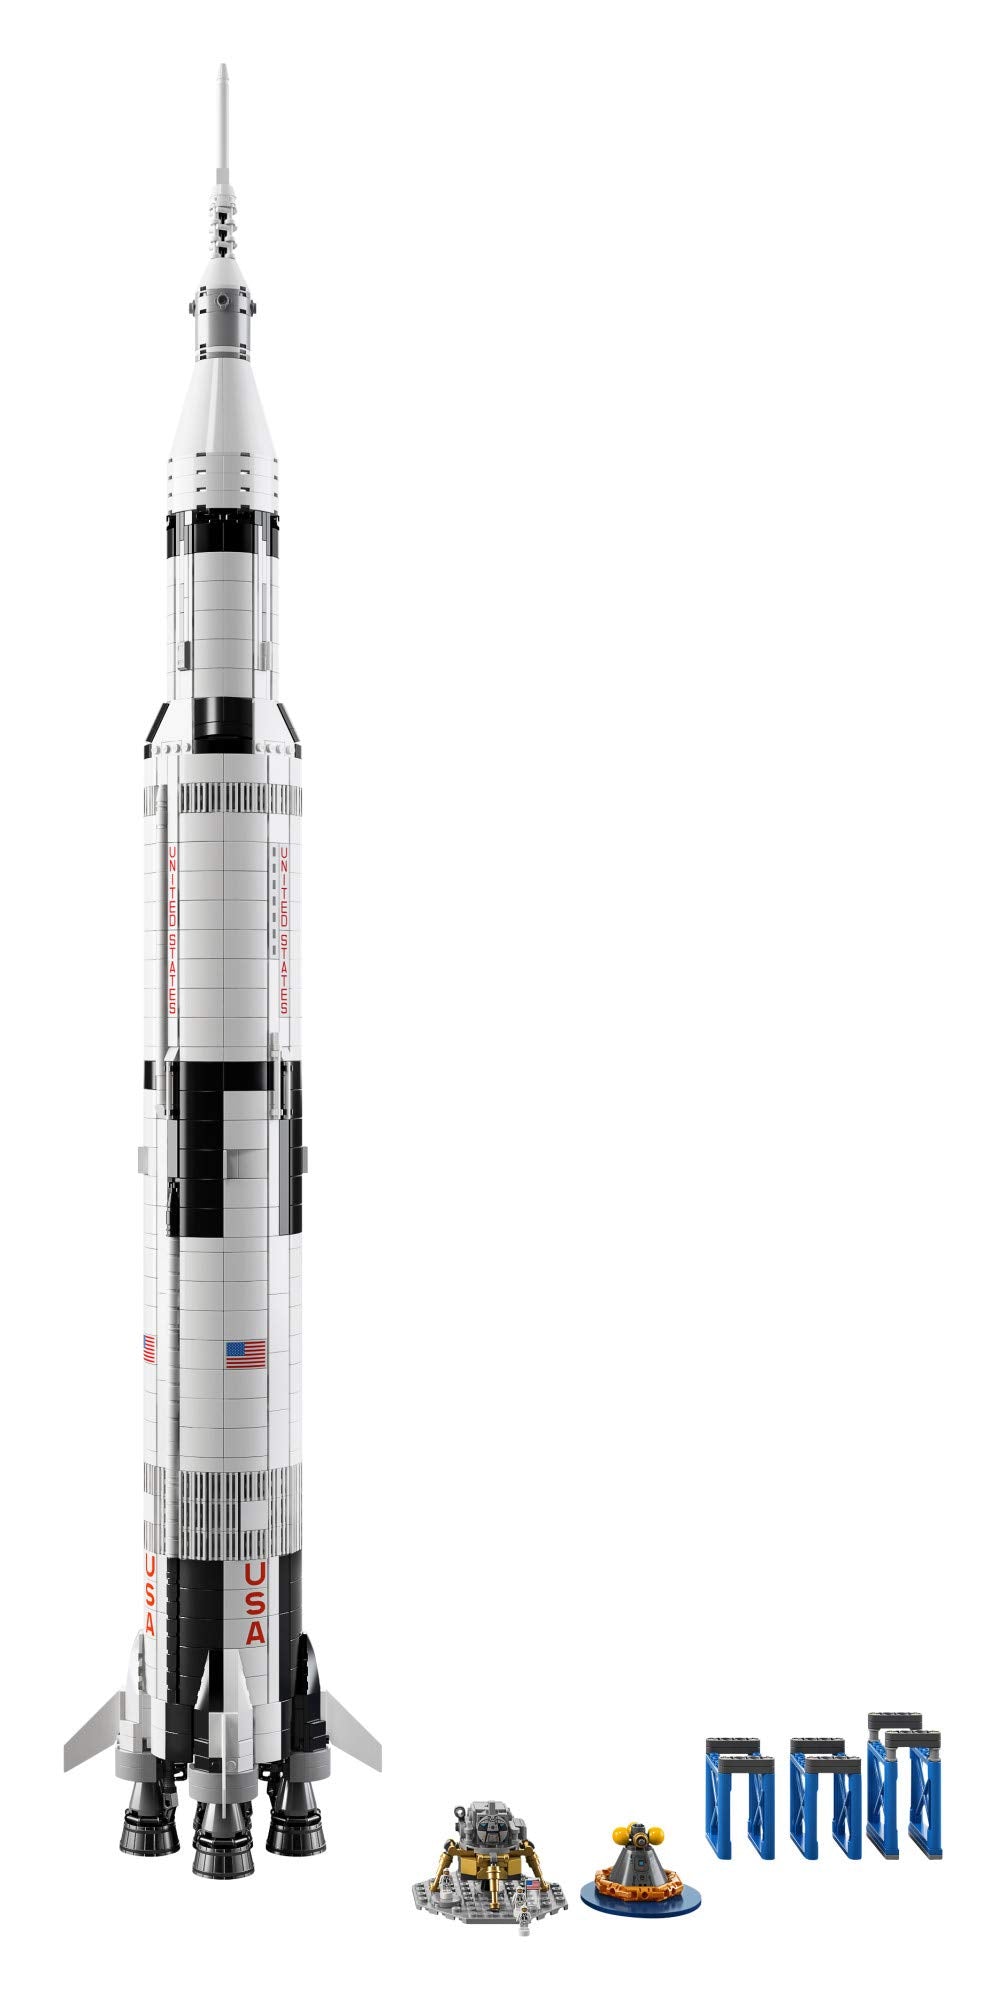 LEGO Ideas NASA Apollo Saturn V 92176 Outer Space Model Rocket for Kids and Adults, Science Building Kit (1969 Pieces)